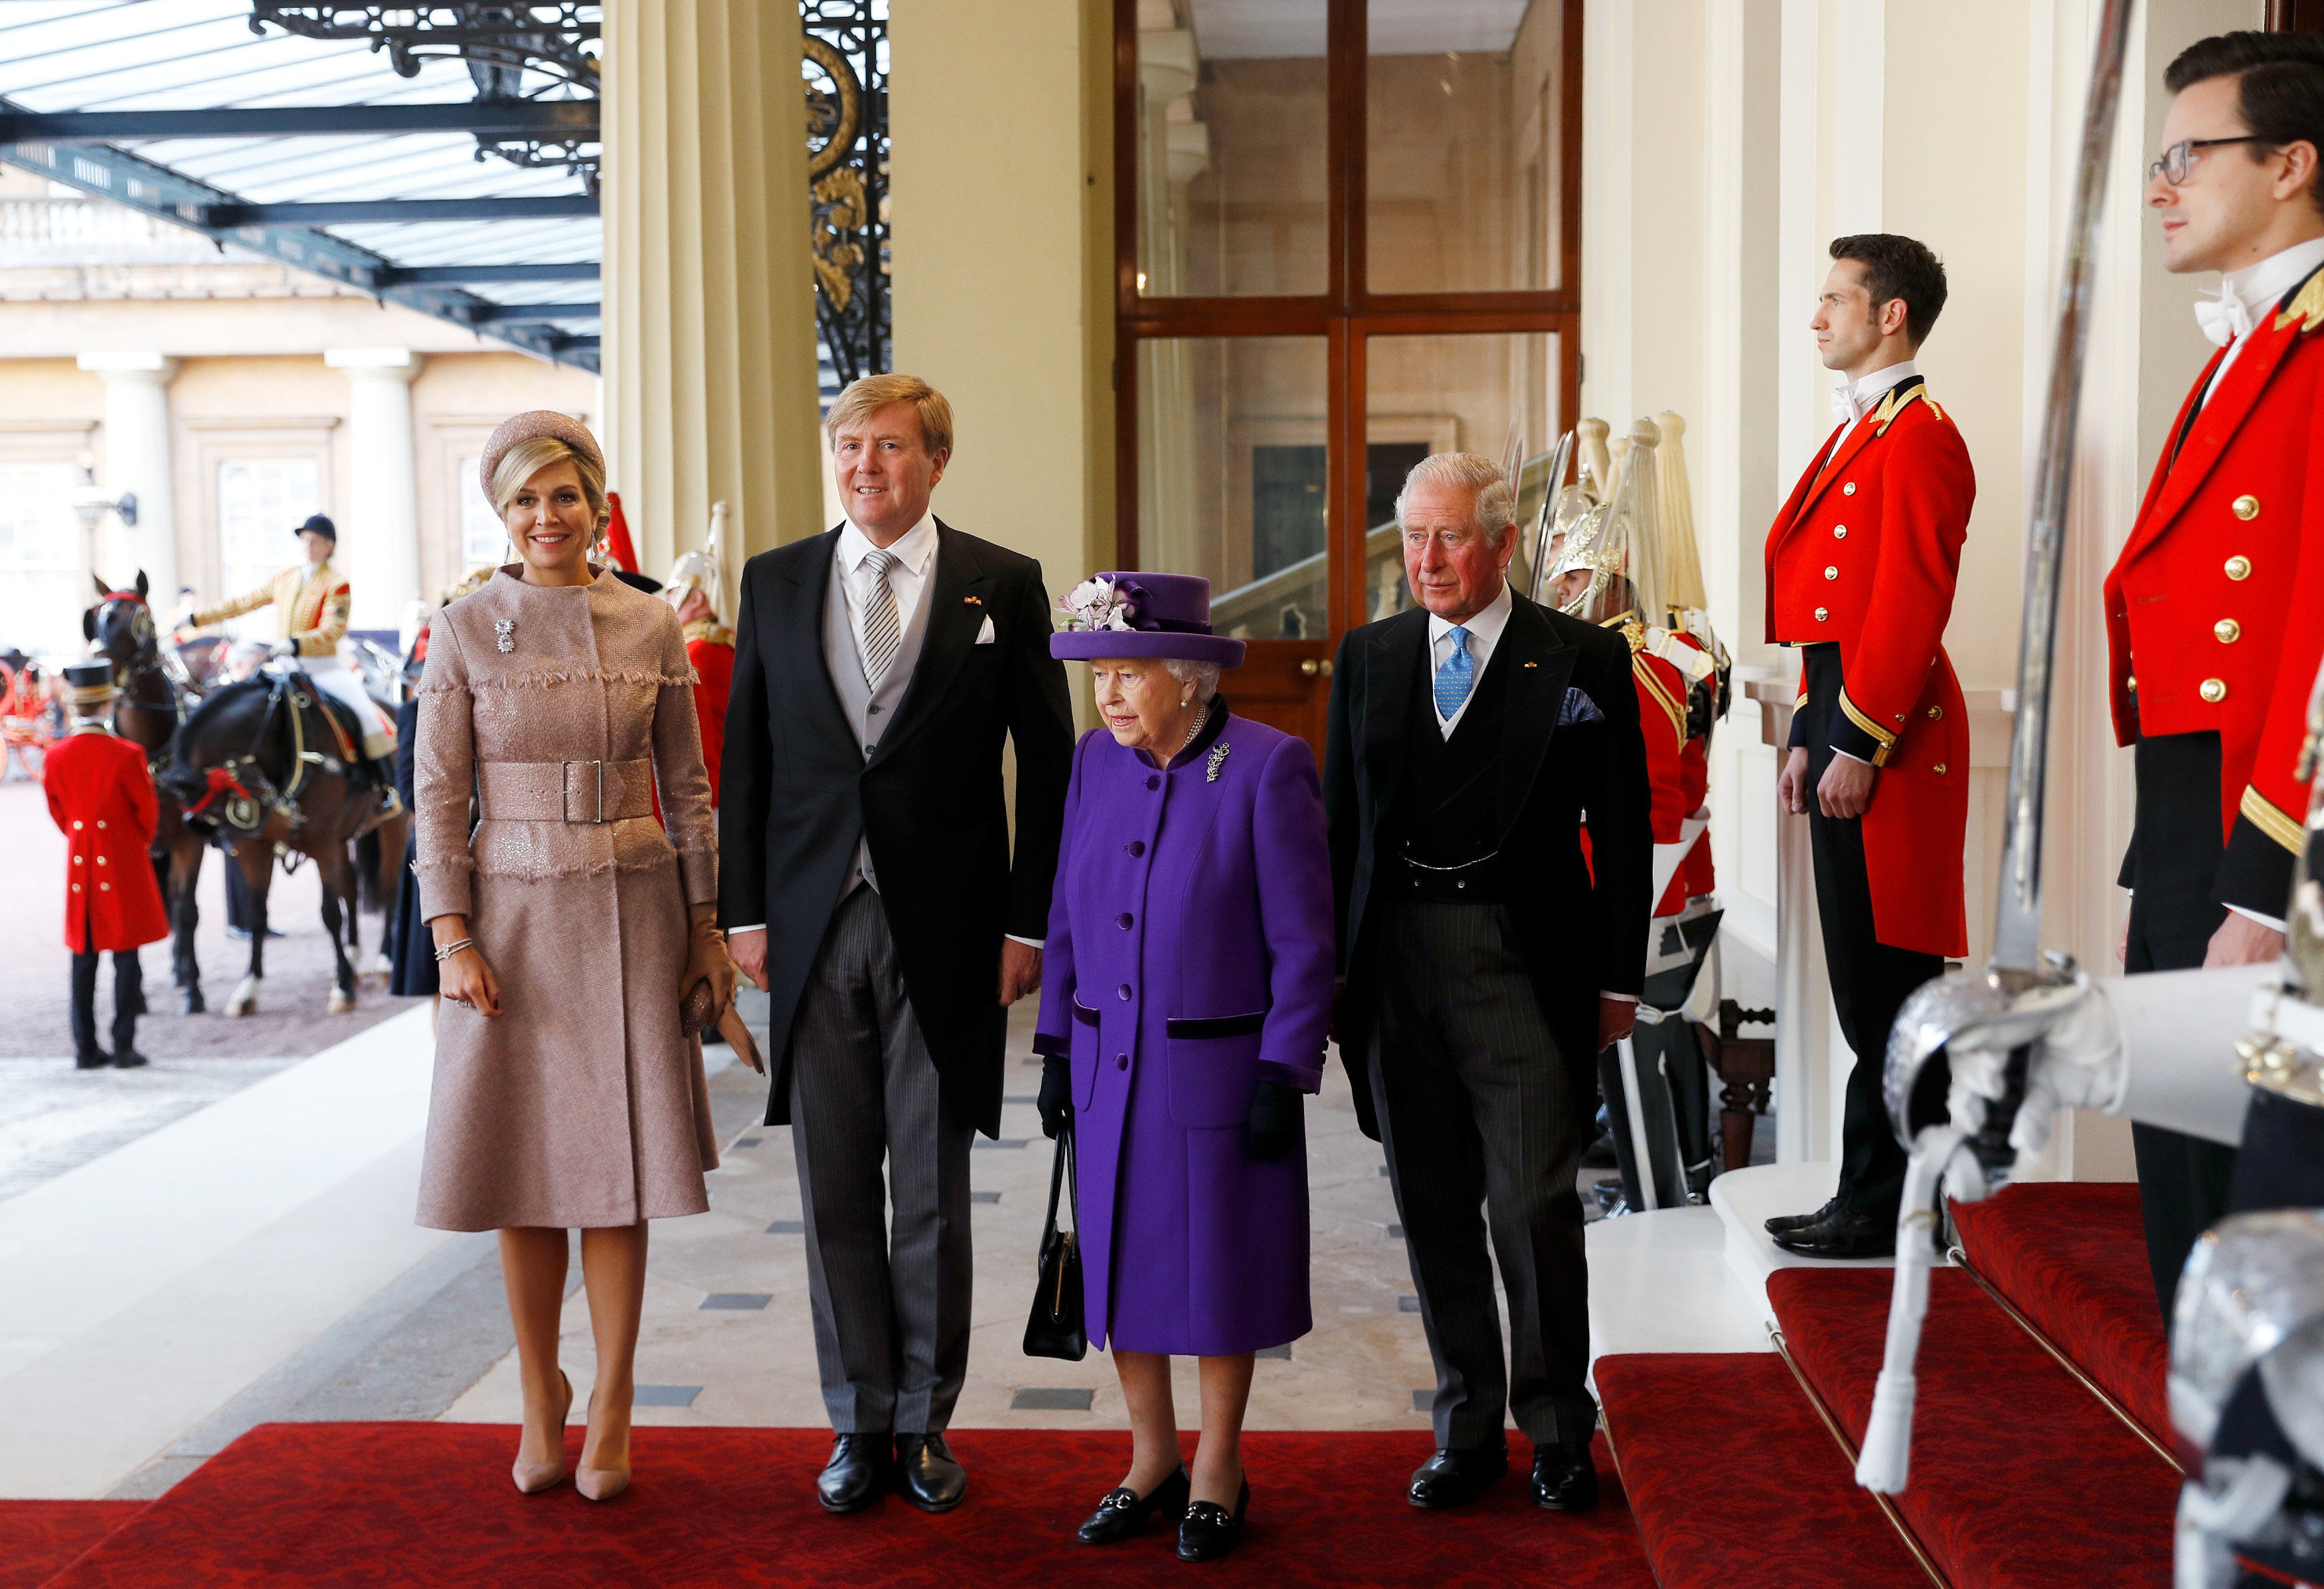 The Queen and The Prince of Wales, The king and queen of the netherlands at Buckingham Palace